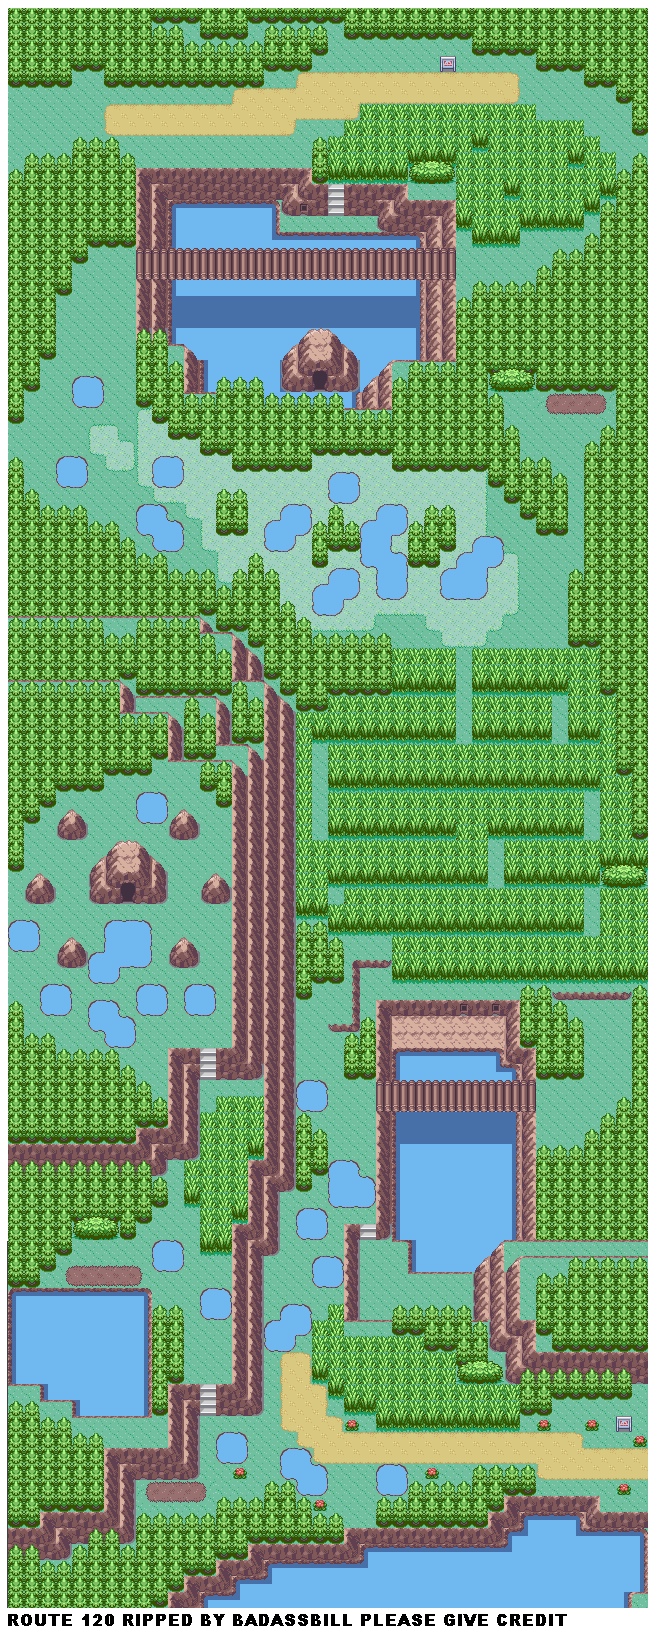 Route 120